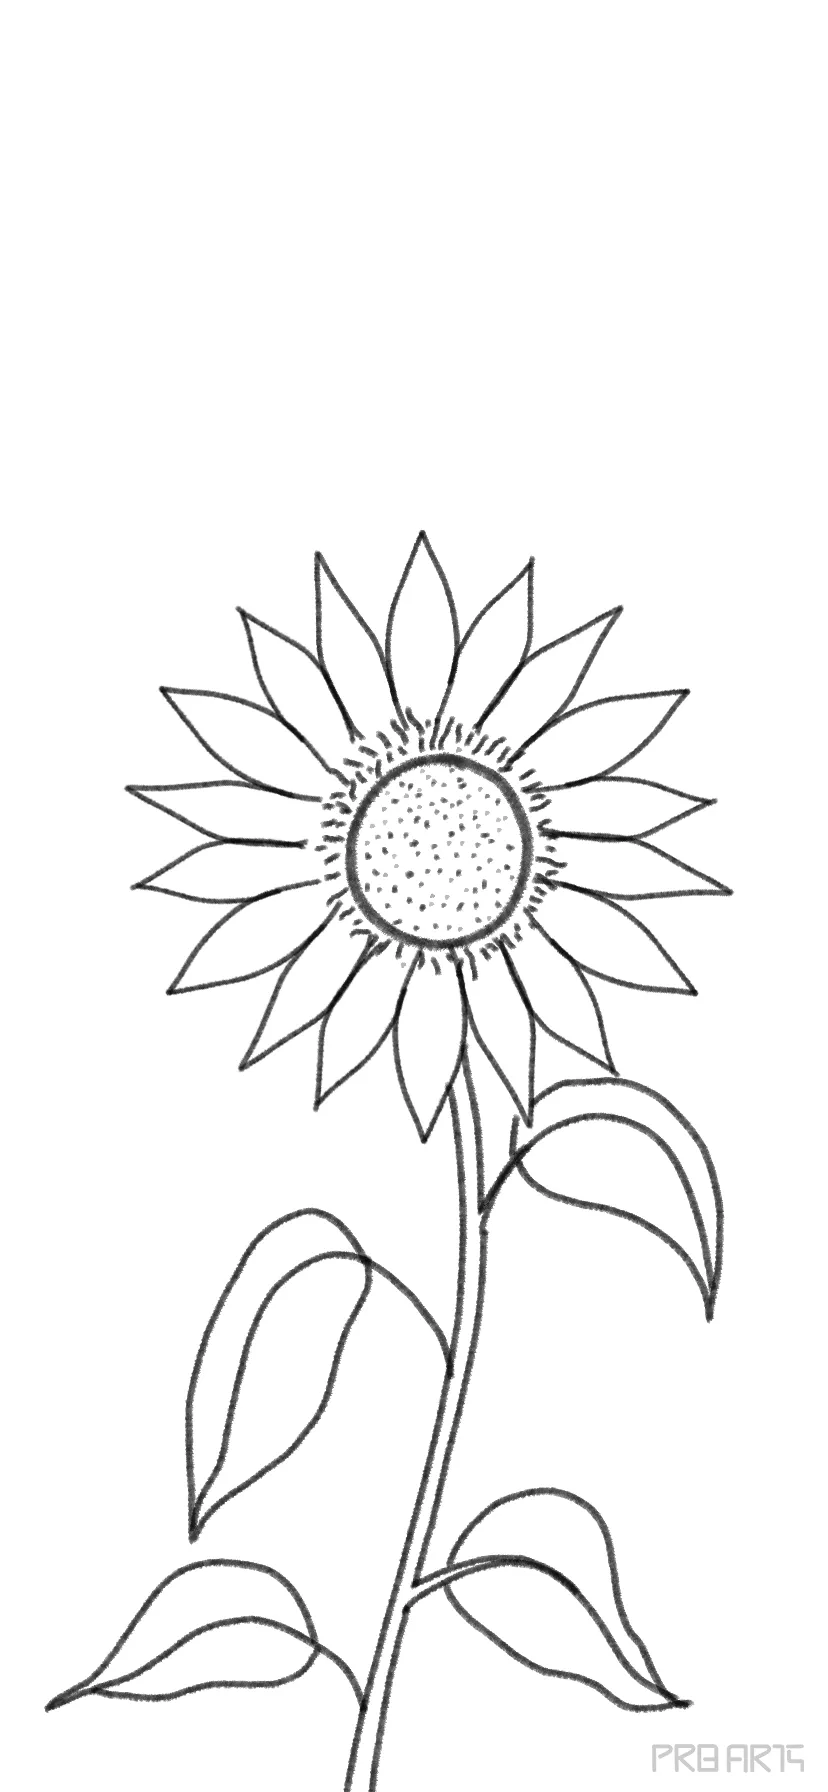 Image Details IST_21861_00156 - Sunflower hand drawn vector illustration.  Floral ink pen sketch. Black and white clipart. Realistic wildflower  freehand drawing. Isolated monochrome floral design element. Sketched  outline. Sunflower hand drawn ink